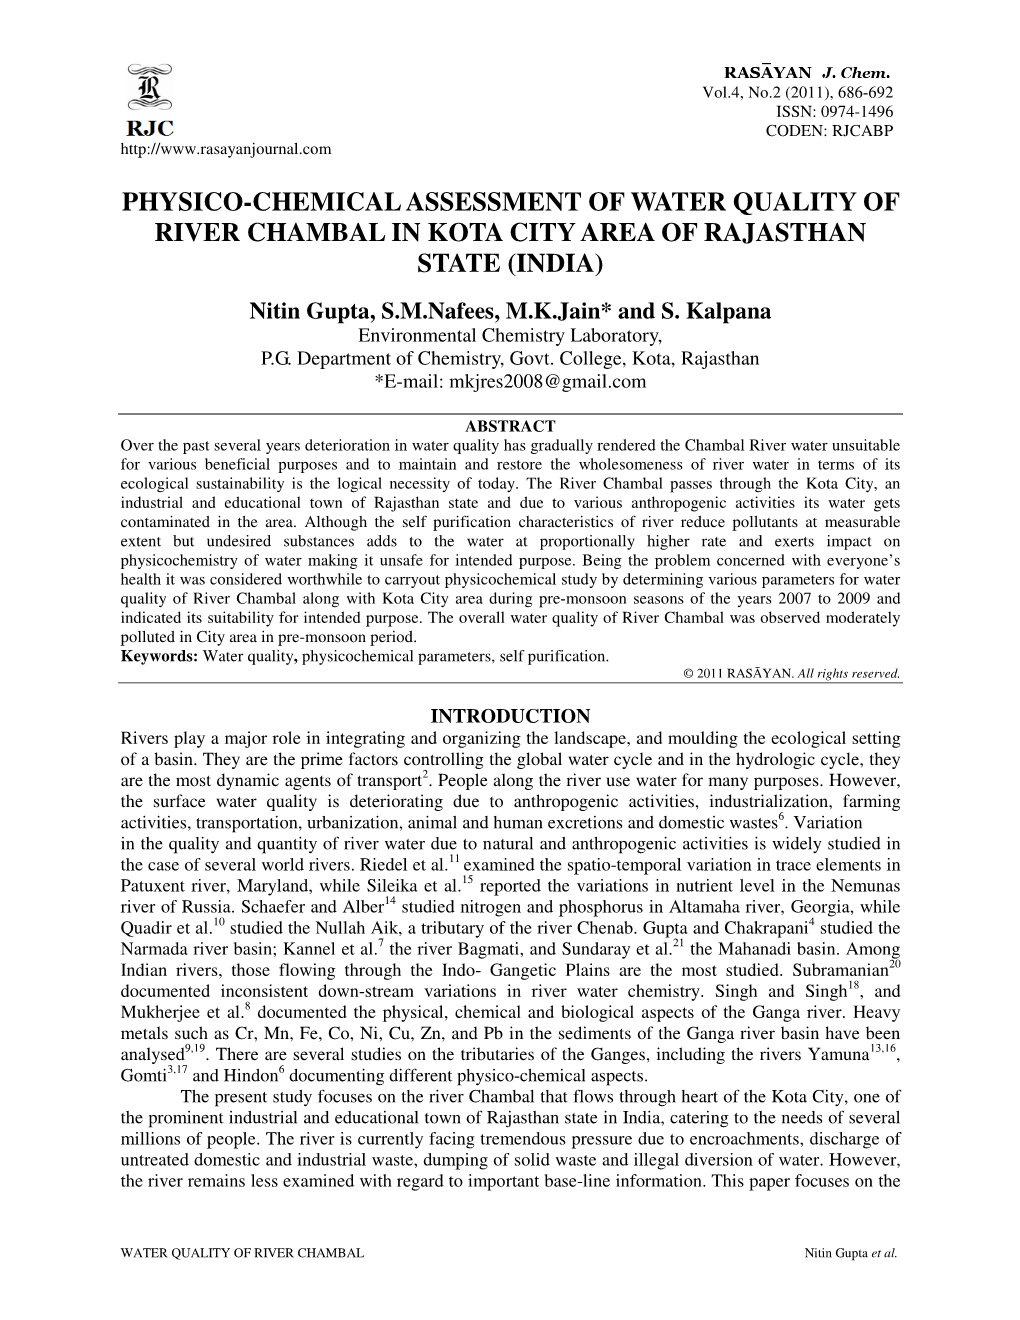 Physico-Chemical Assessment of Water Quality of River Chambal in Kota City Area of Rajasthan State (India)